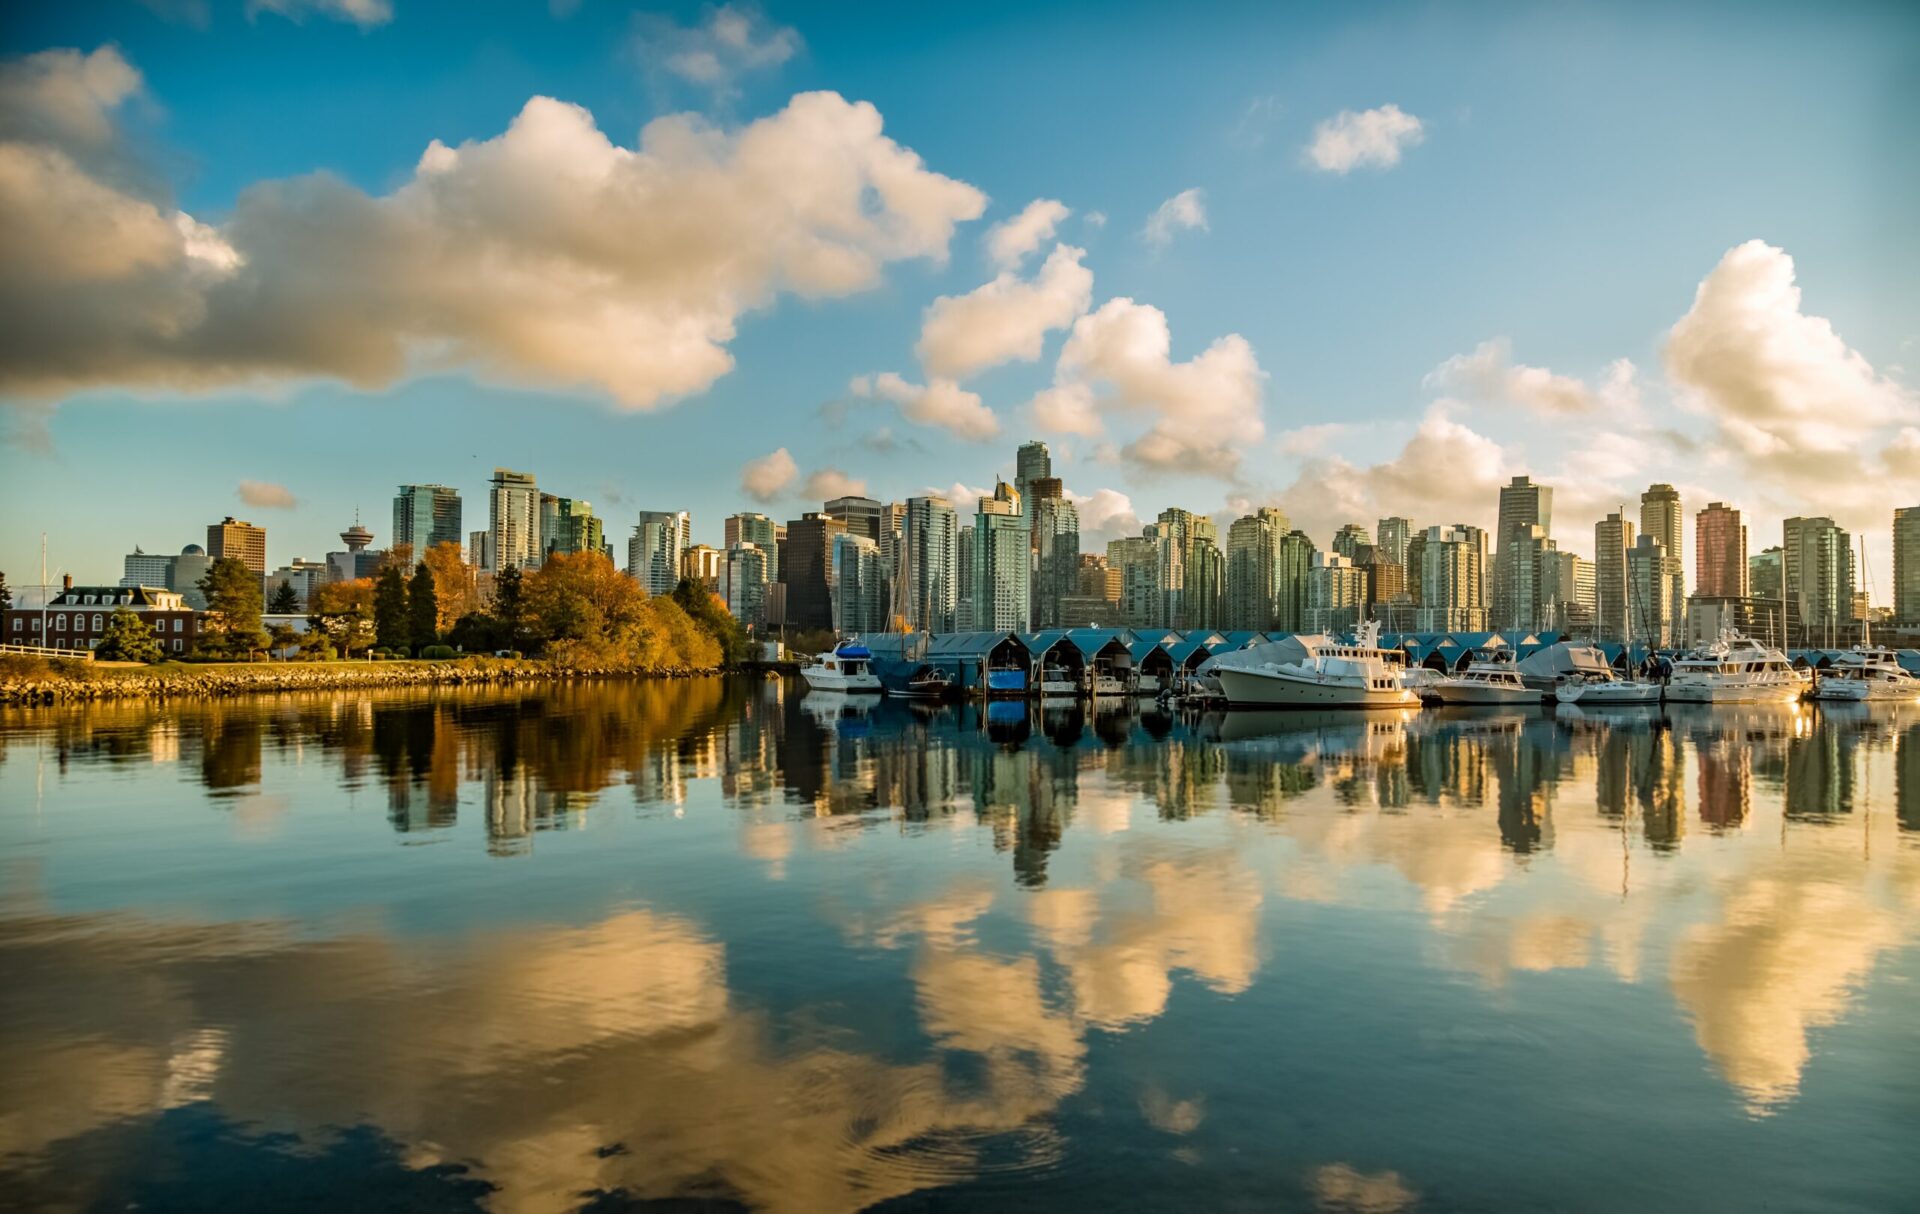 Skyscrapers from the city of Vancouver in front of a blue sky with clouds reflected in the water